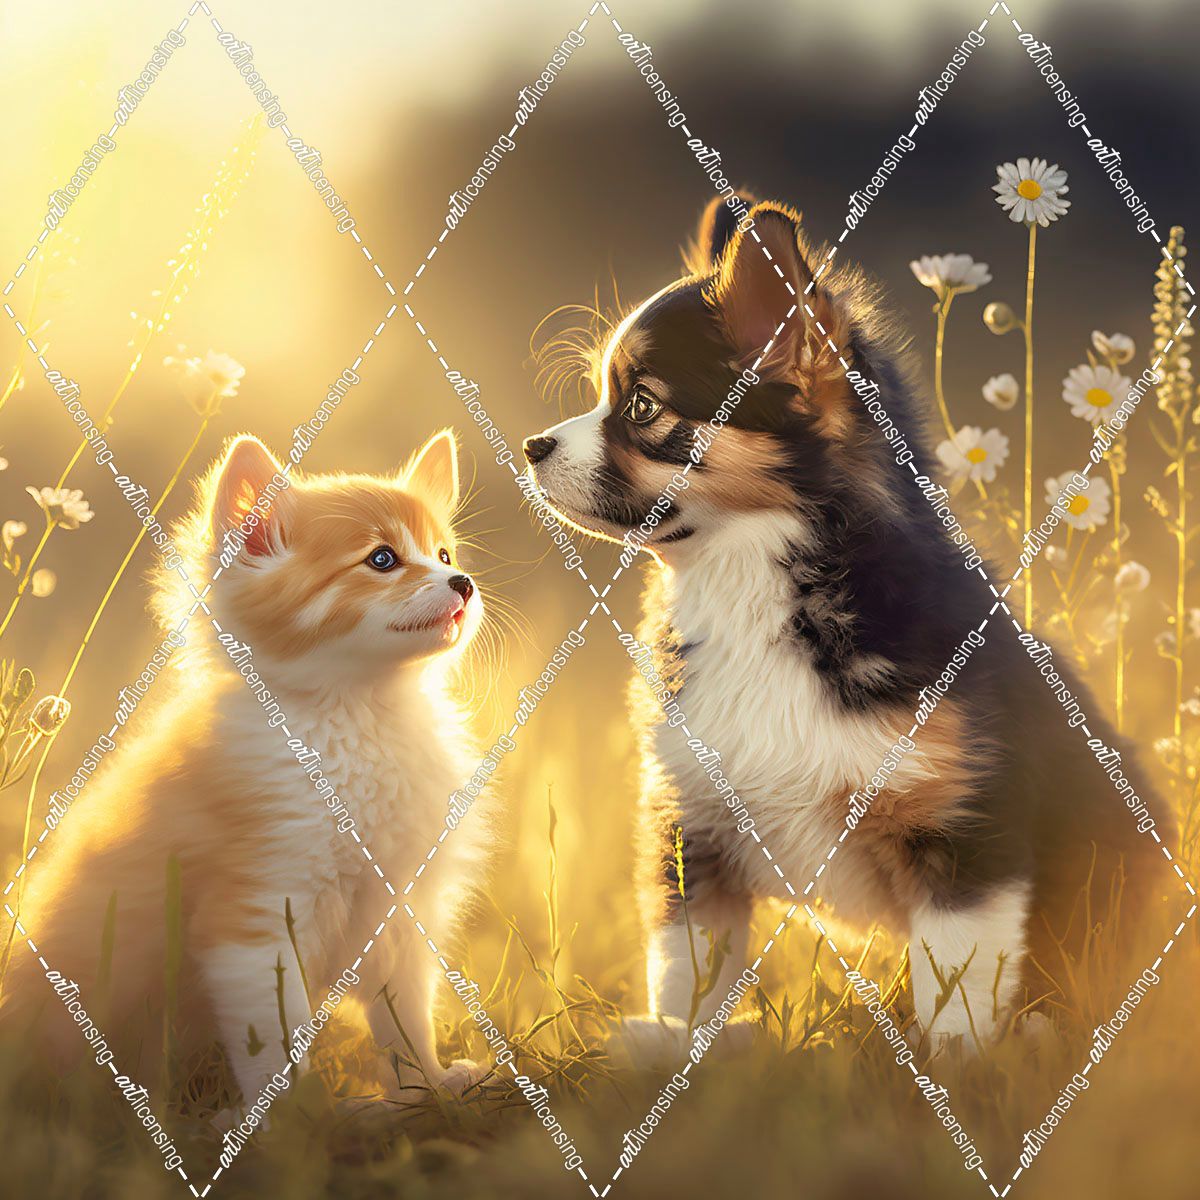 Cats And Dogs 20